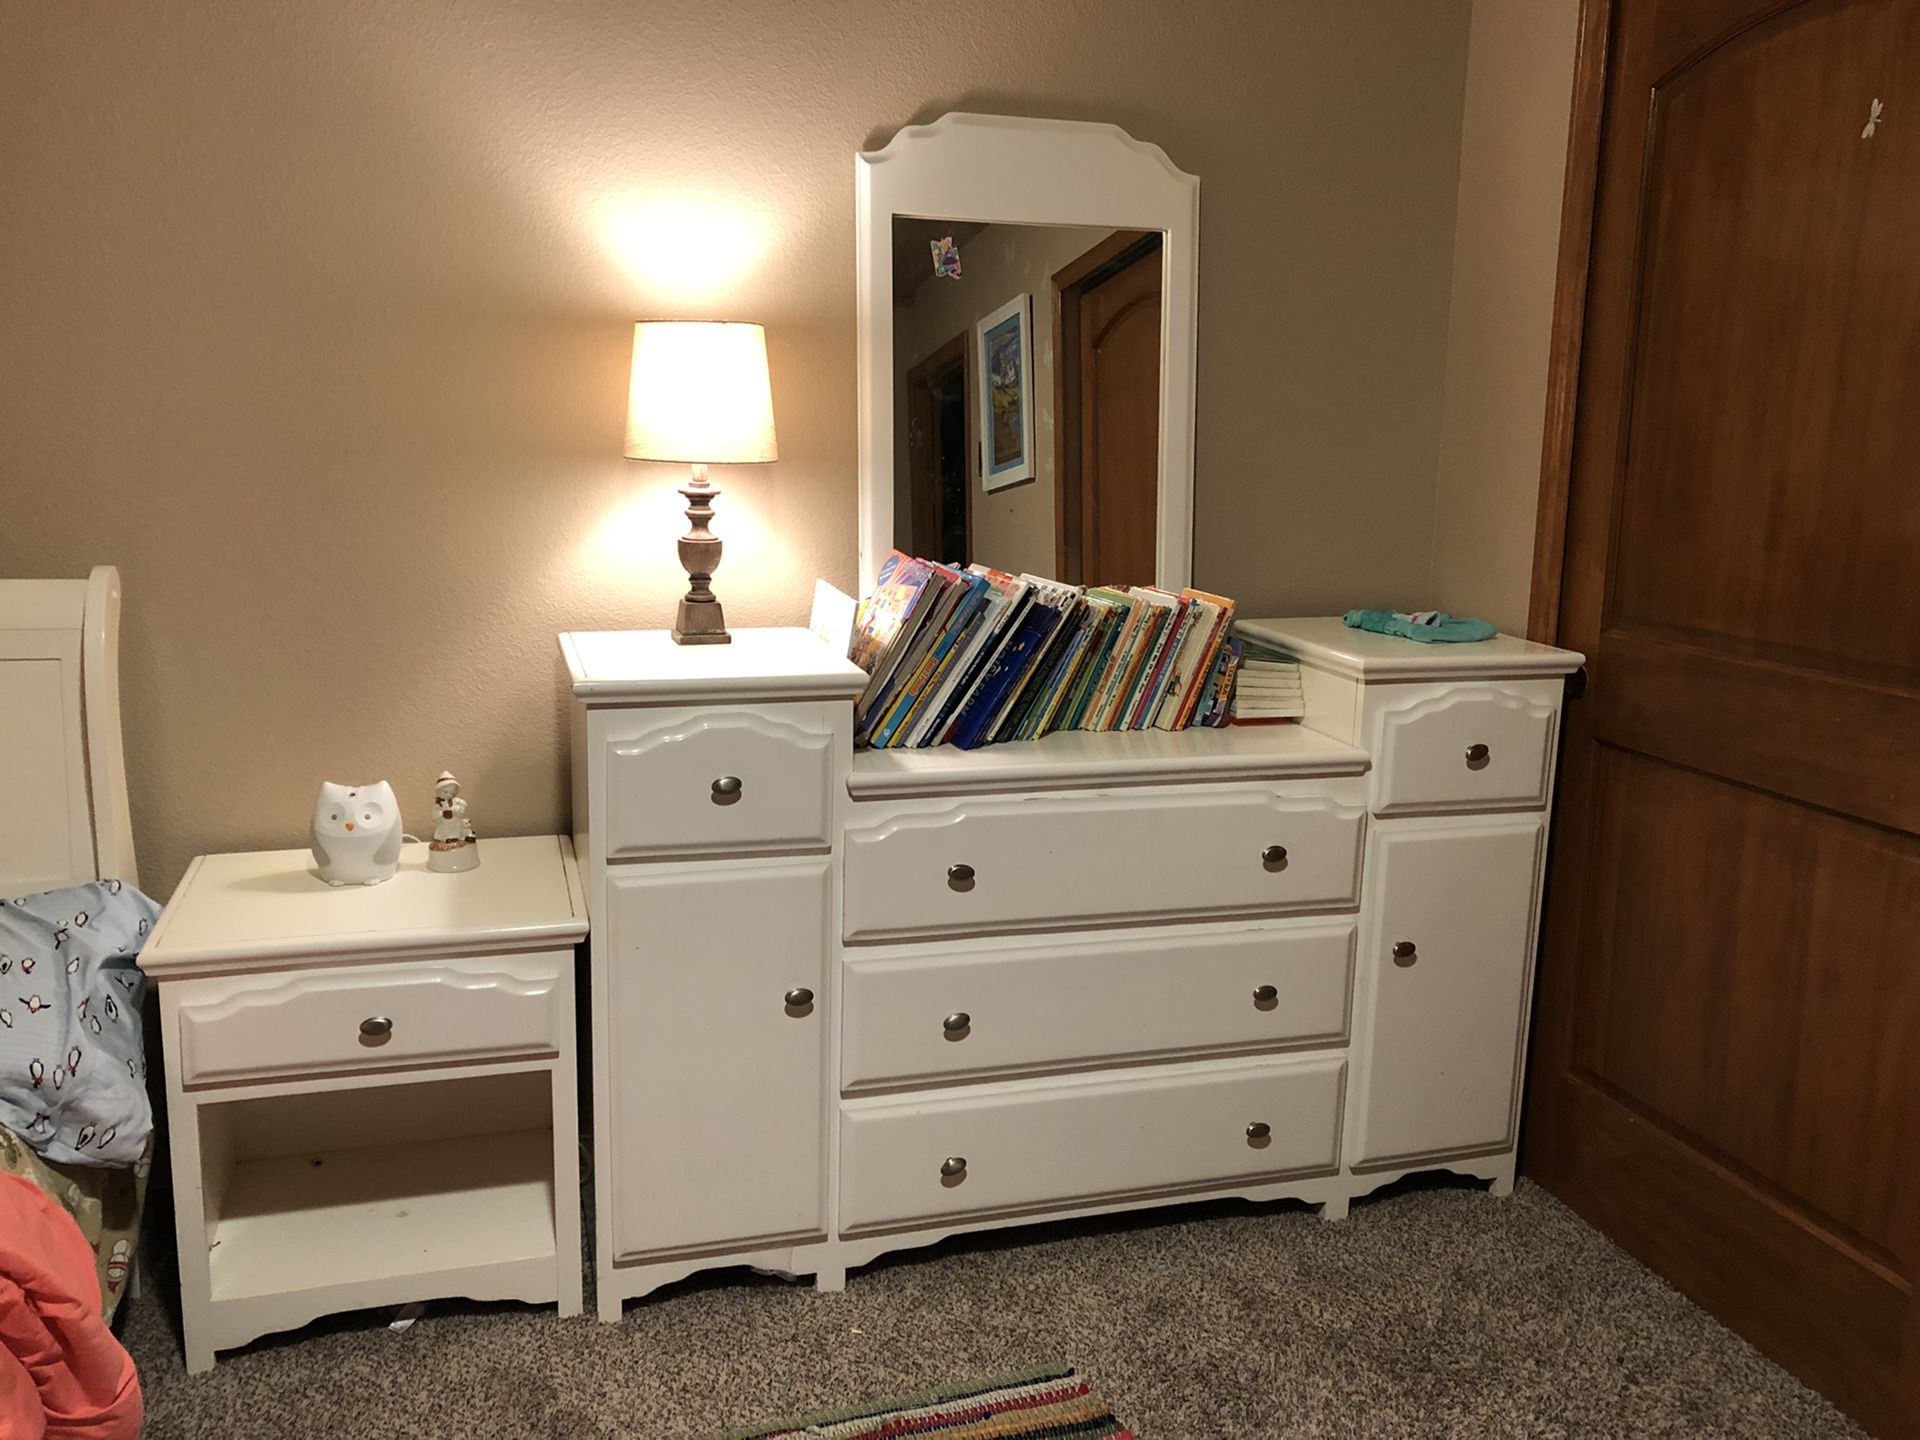 Price firm on set large dresser w/ mirror and night stand